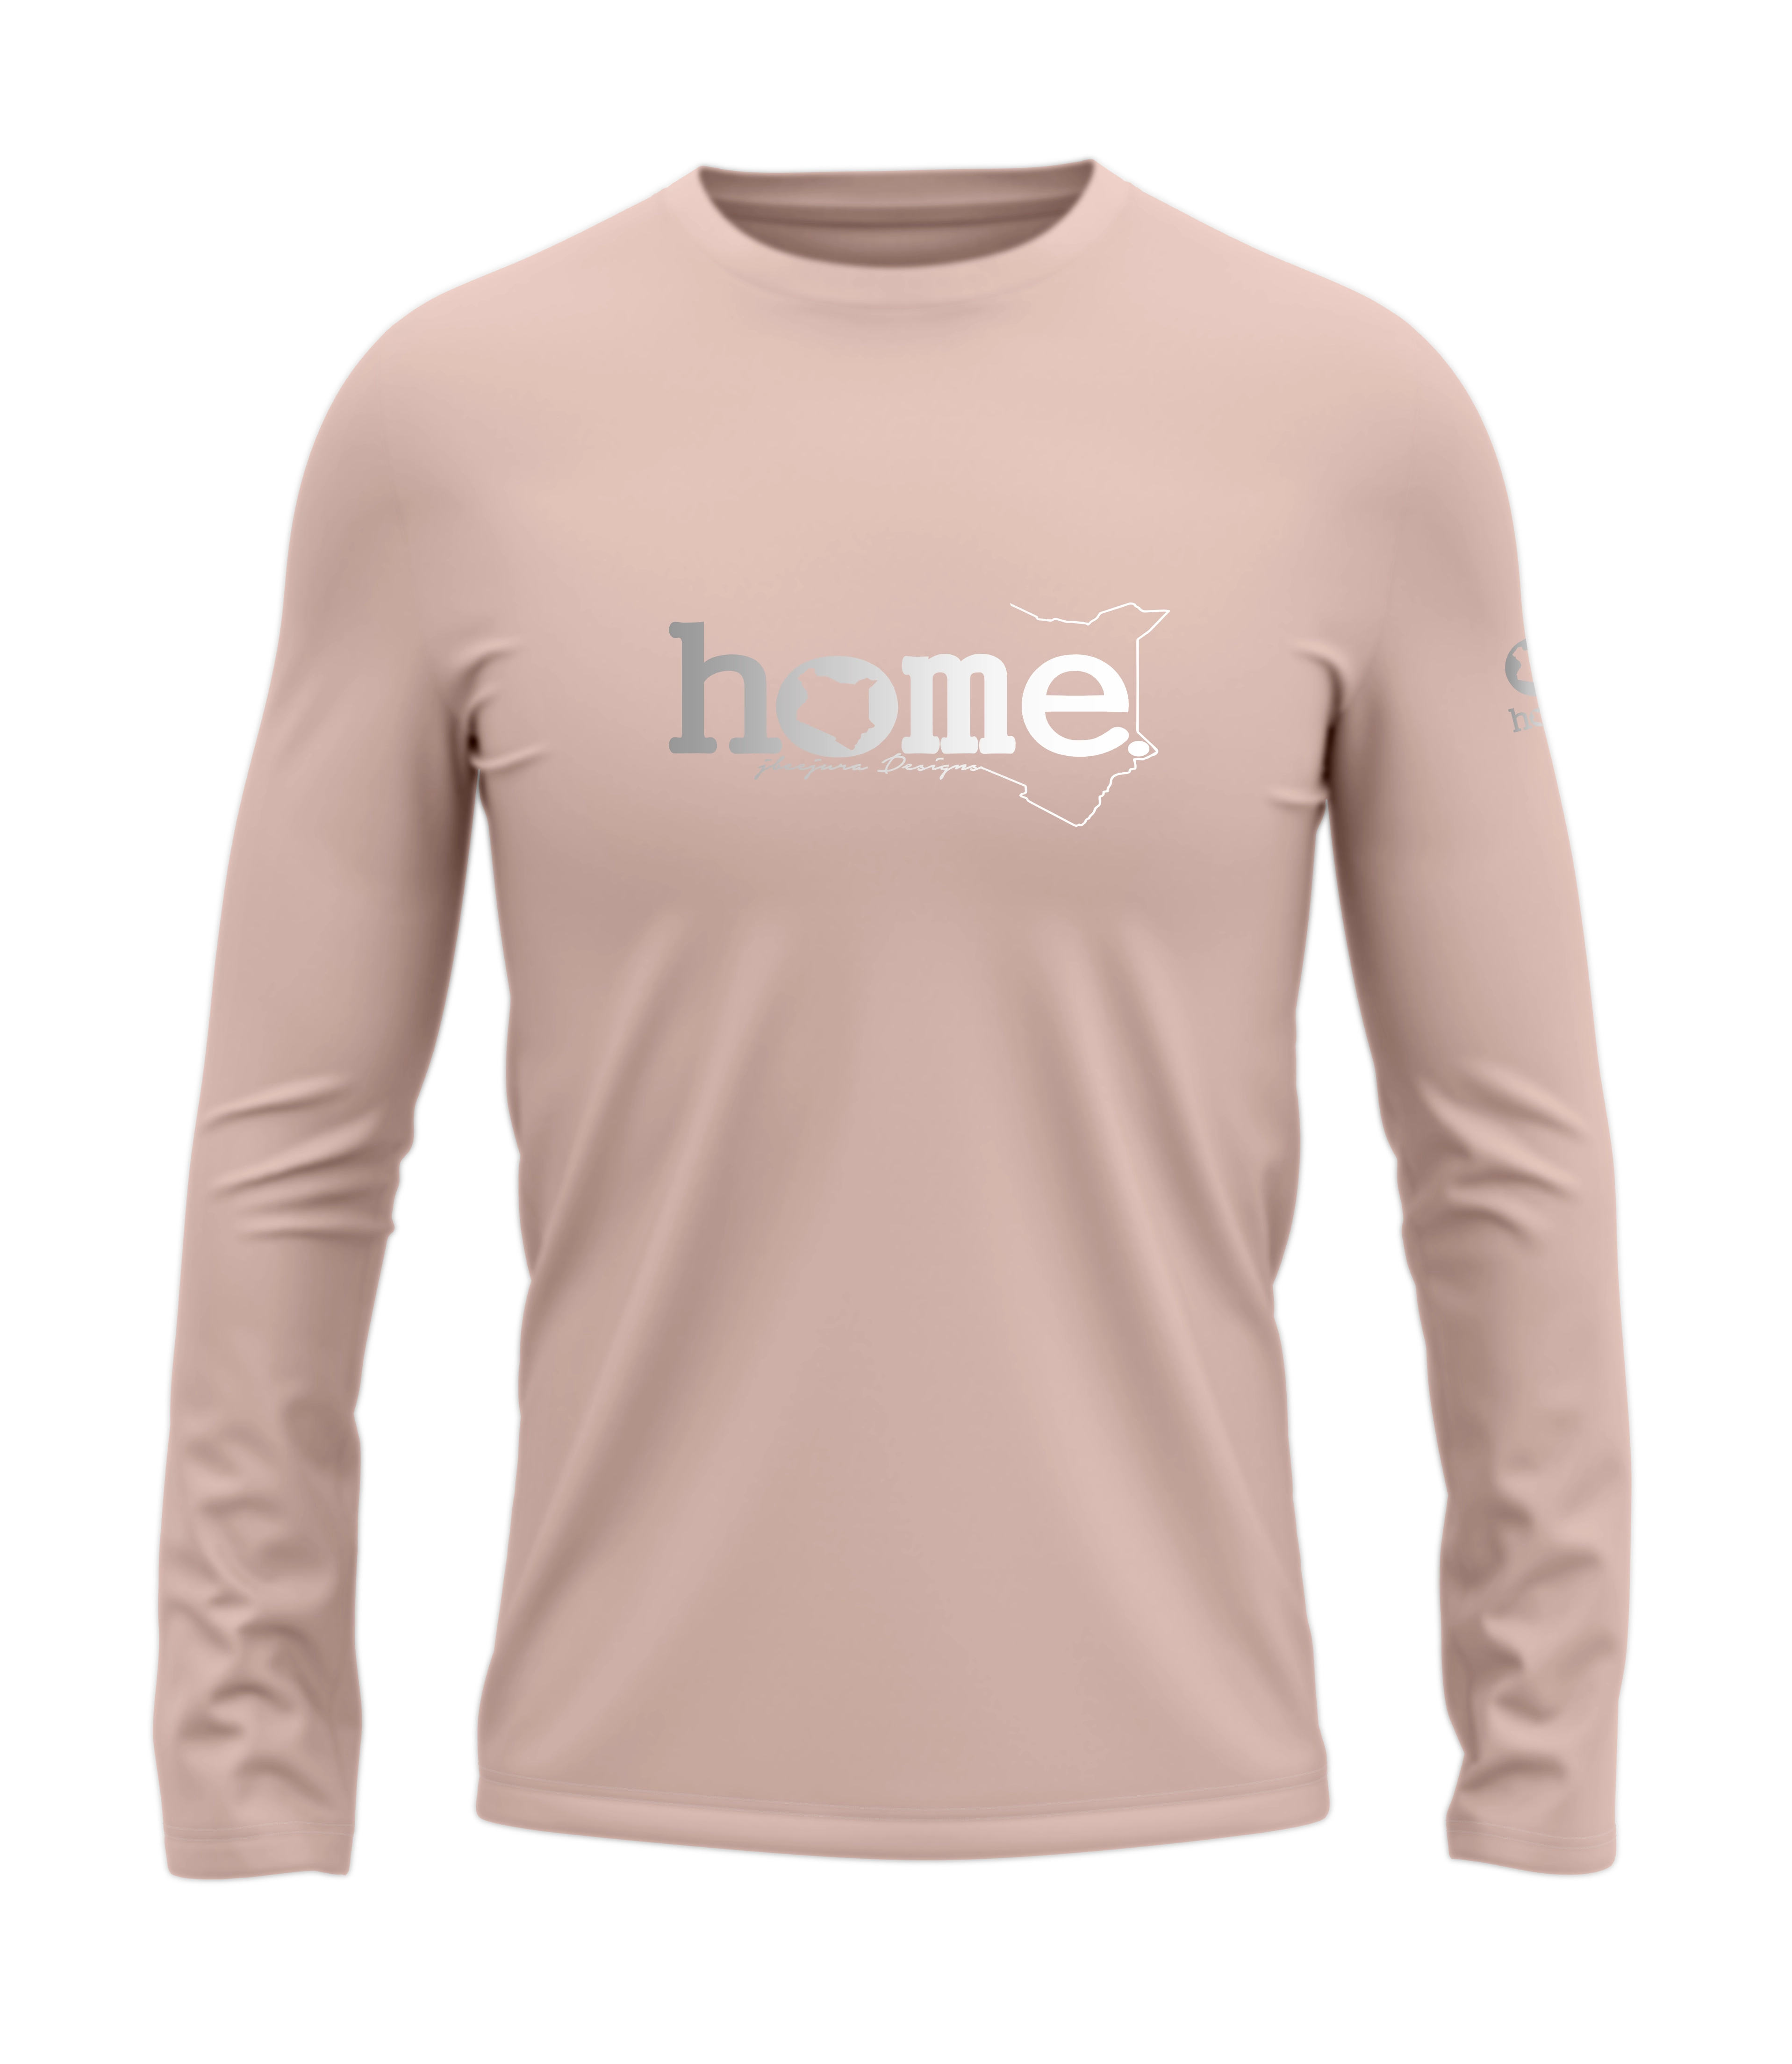 home_254 LONG-SLEEVED PEACH T-SHIRT WITH A SILVER CLASSIC WORDS PRINT – COTTON PLUS FABRIC